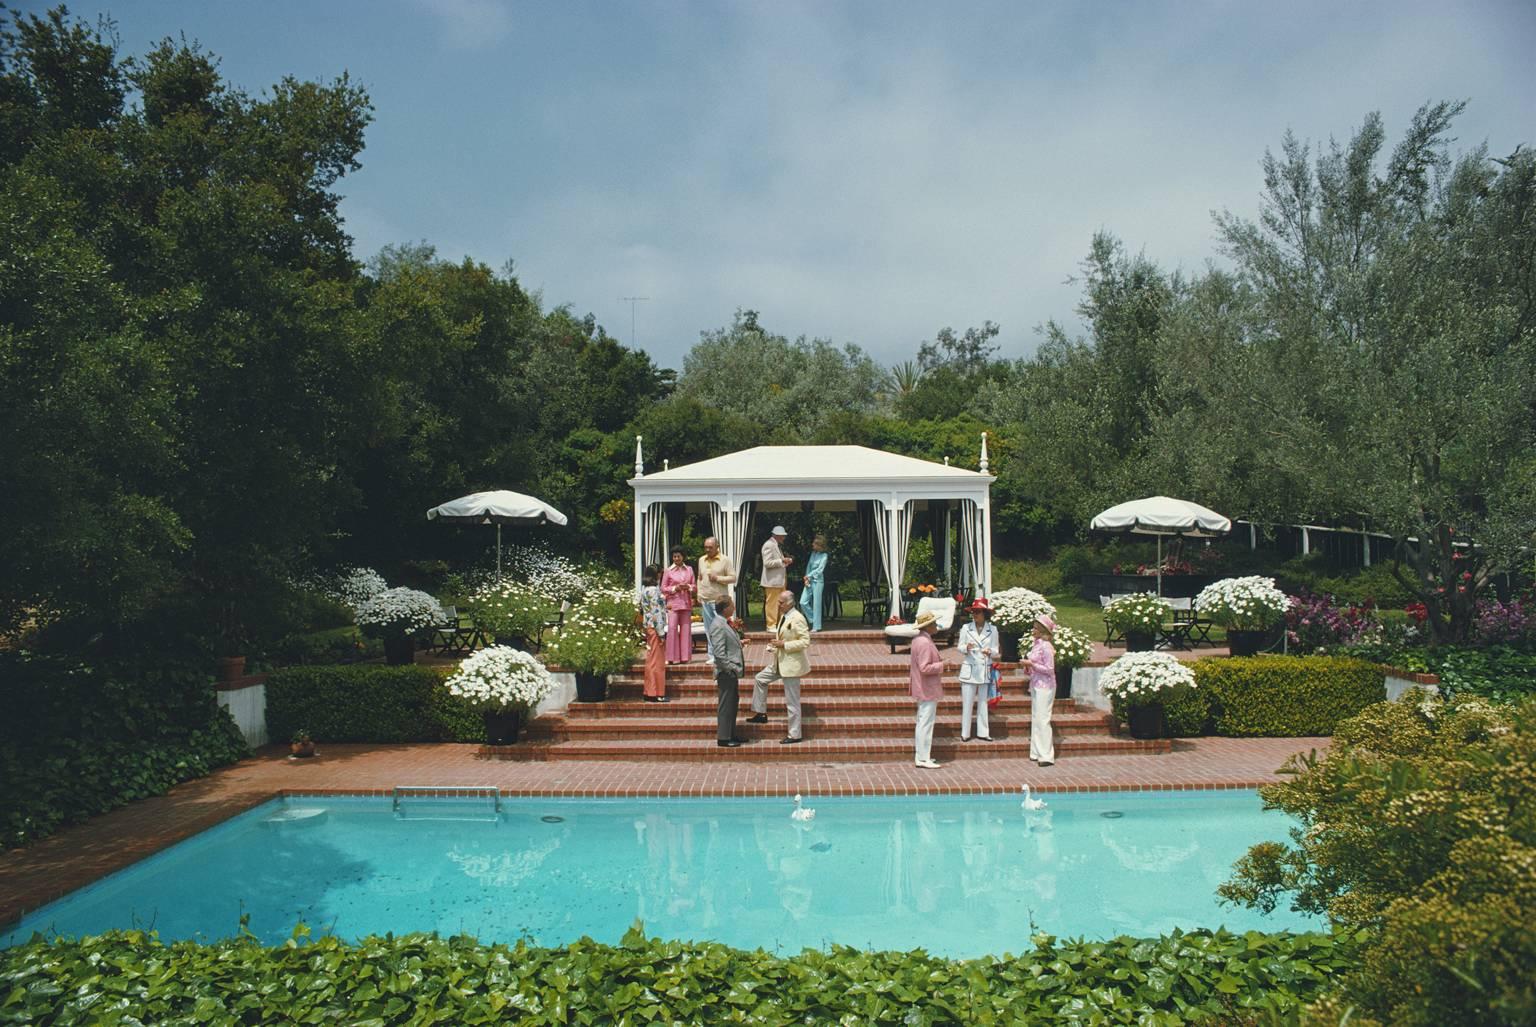 Fashionable guests attend a poolside luncheon at the home of Dorothy Laughlin in Santa Barbara, California, May 1975.

Typically 'Slim' this photograph epitomises the travel style and glamour of the period's wealthy and famous, beautifully